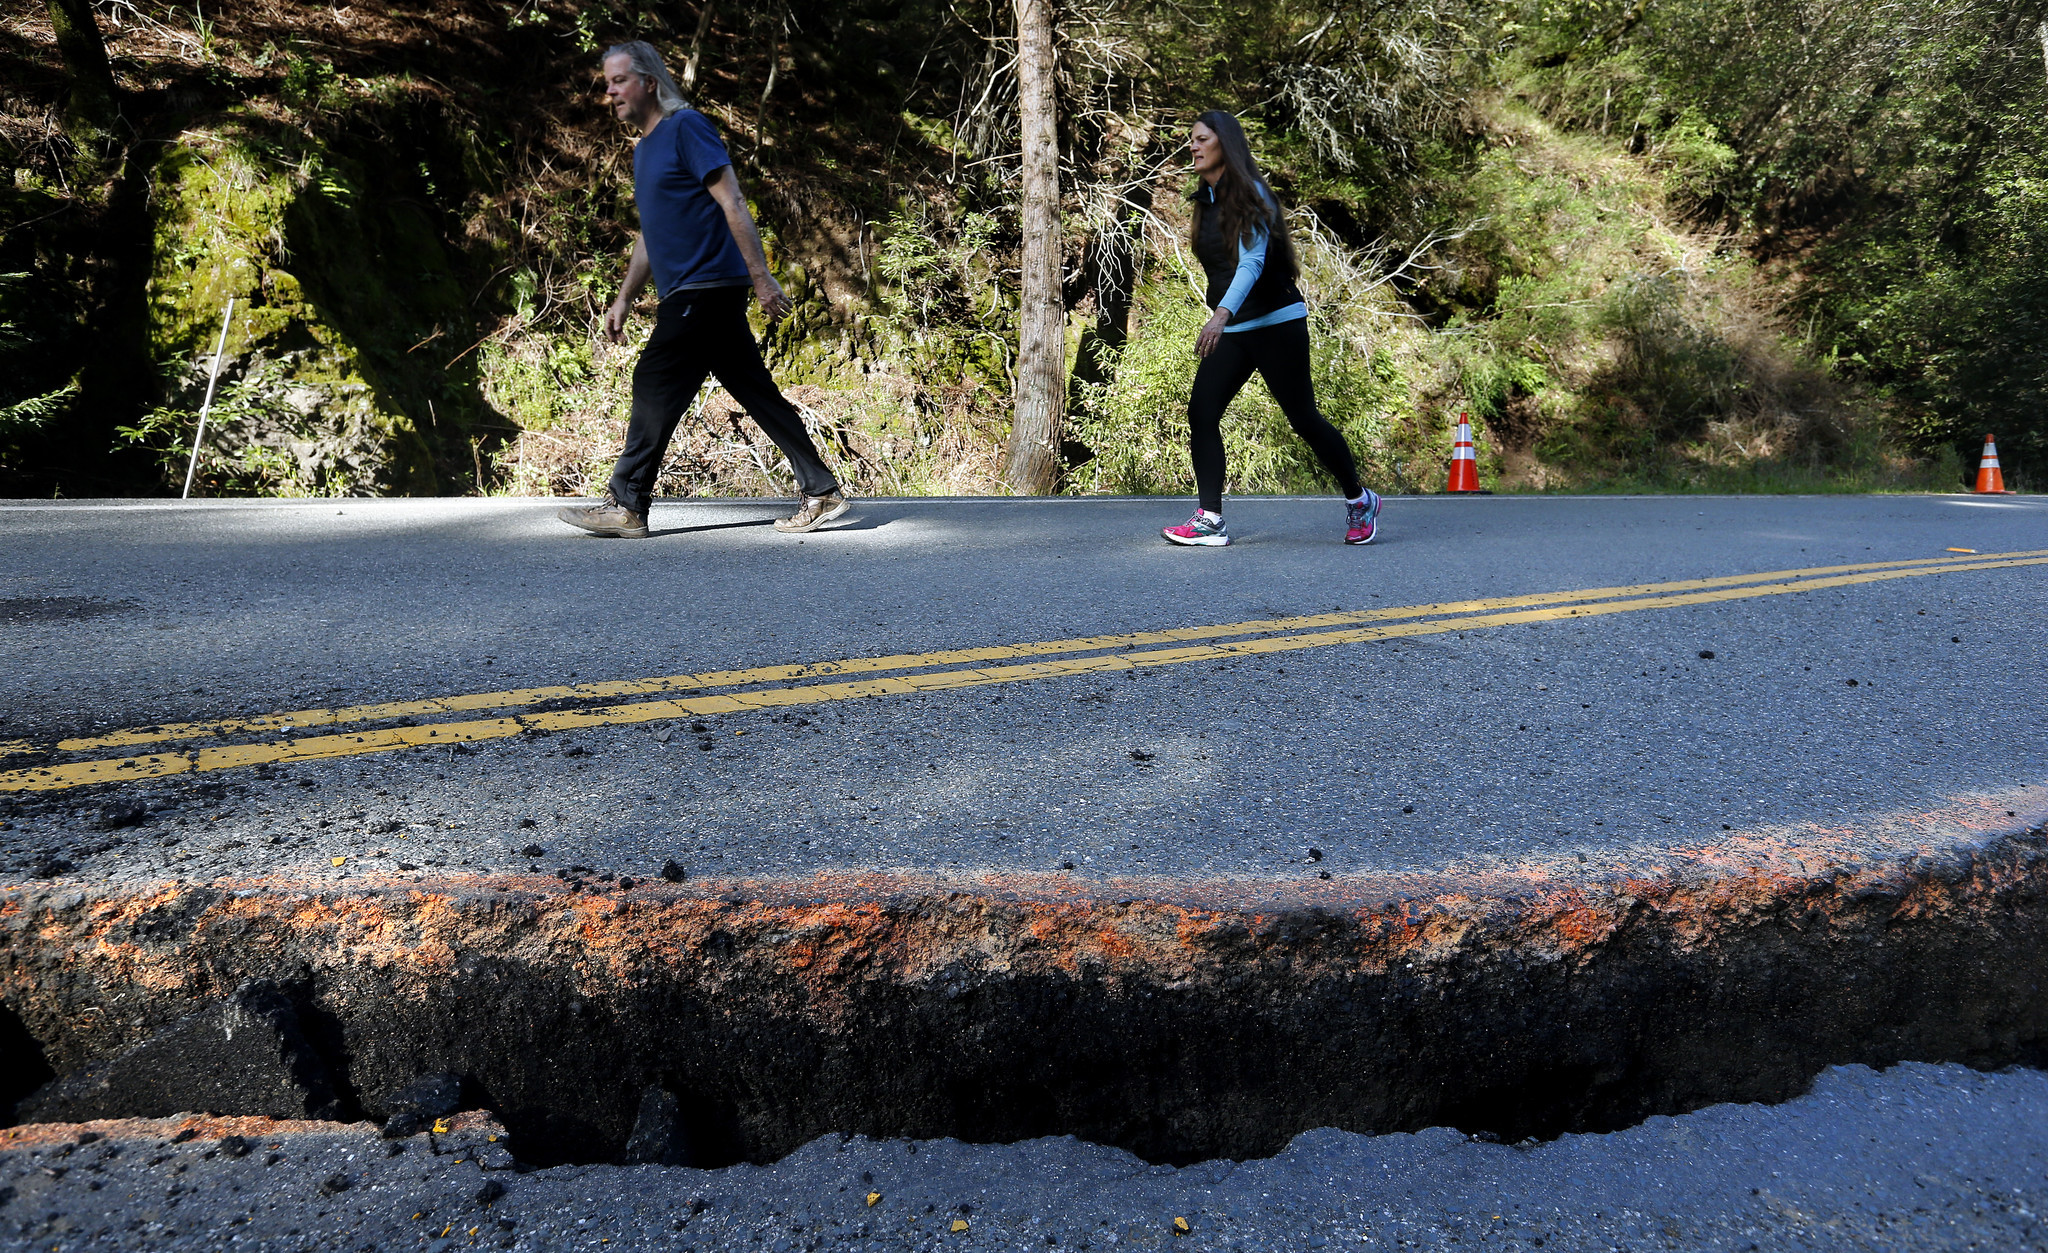 Along with landslides, Caltrans will have to repair the asphalt on Highway 1 in Big Sur, which was damaged by runoff from winter storms.